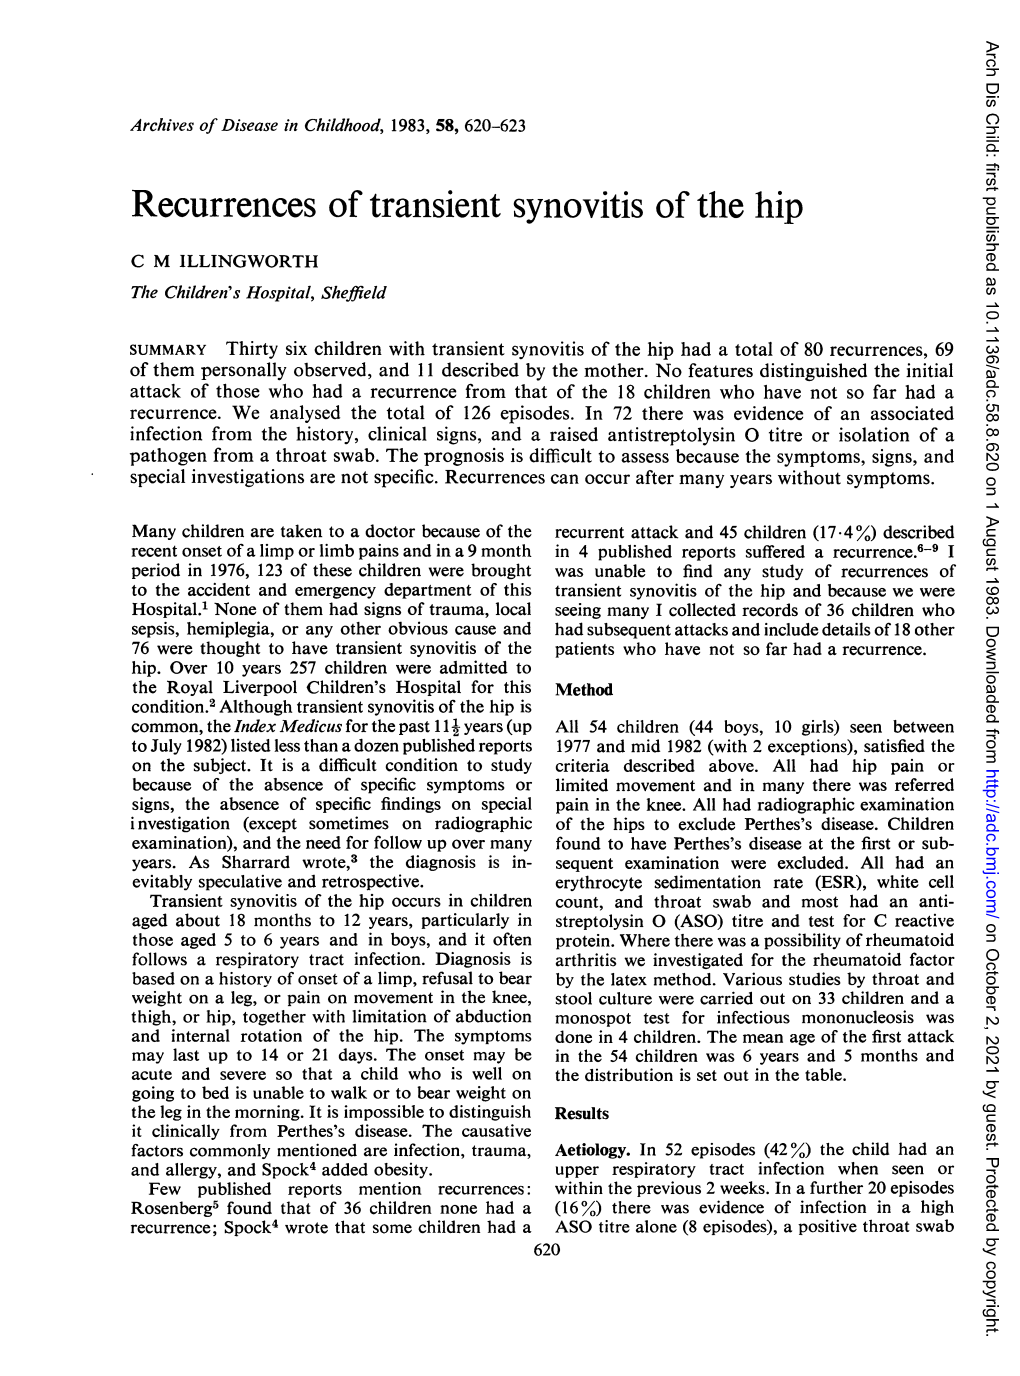 Recurrences of Transient Synovitis of the Hip